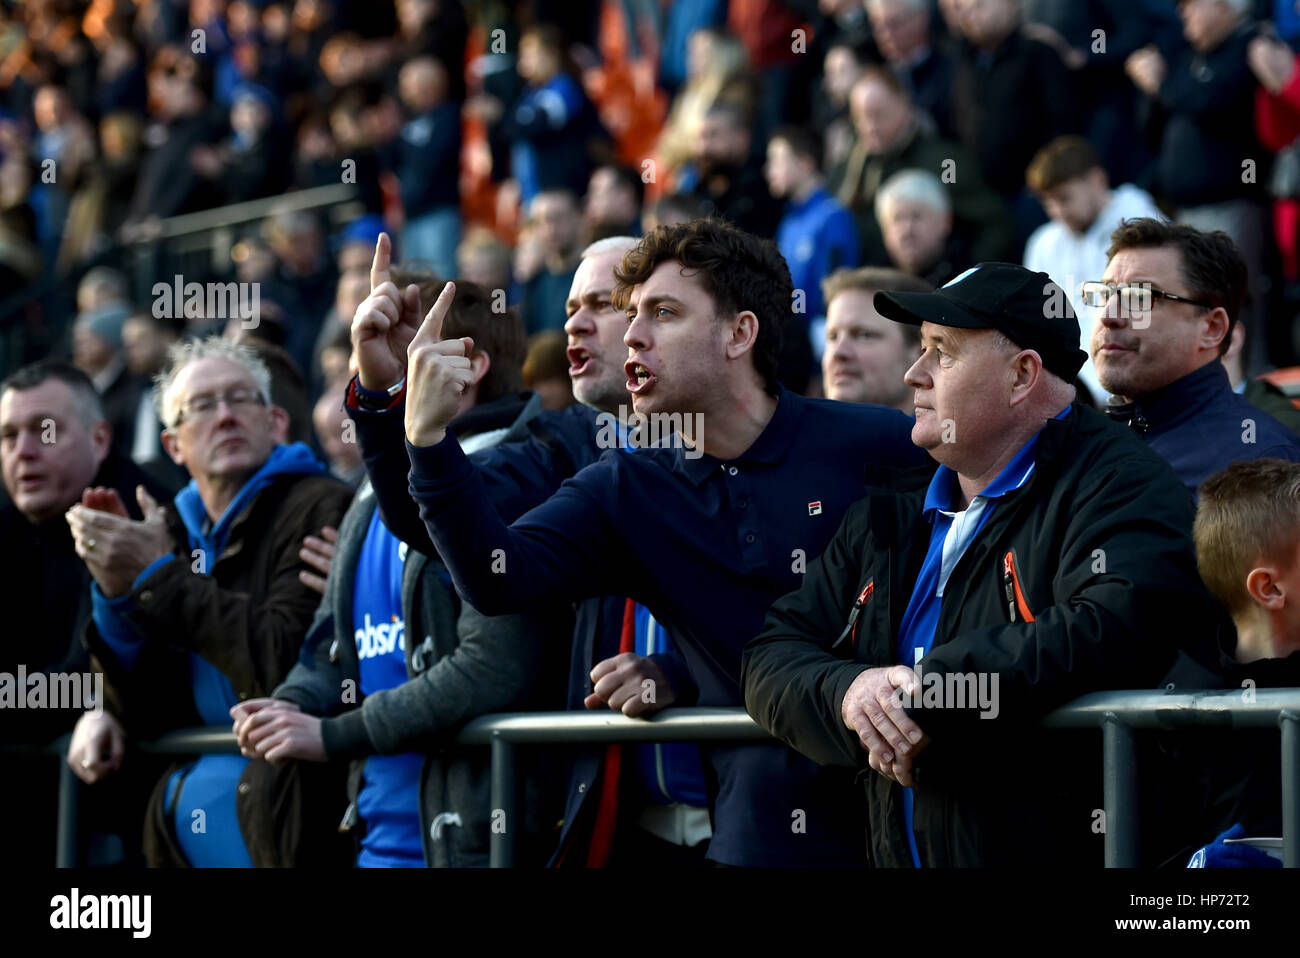 Portsmouth fans make a point after the Sky Bet League 2 match between Barnet and Portsmouth at The Hive Stadium in London. February 18, 2017.  Editorial use only. No merchandising. For Football images FA and Premier League restrictions apply inc. no internet/mobile usage without FAPL license - for details contact Football Dataco Stock Photo